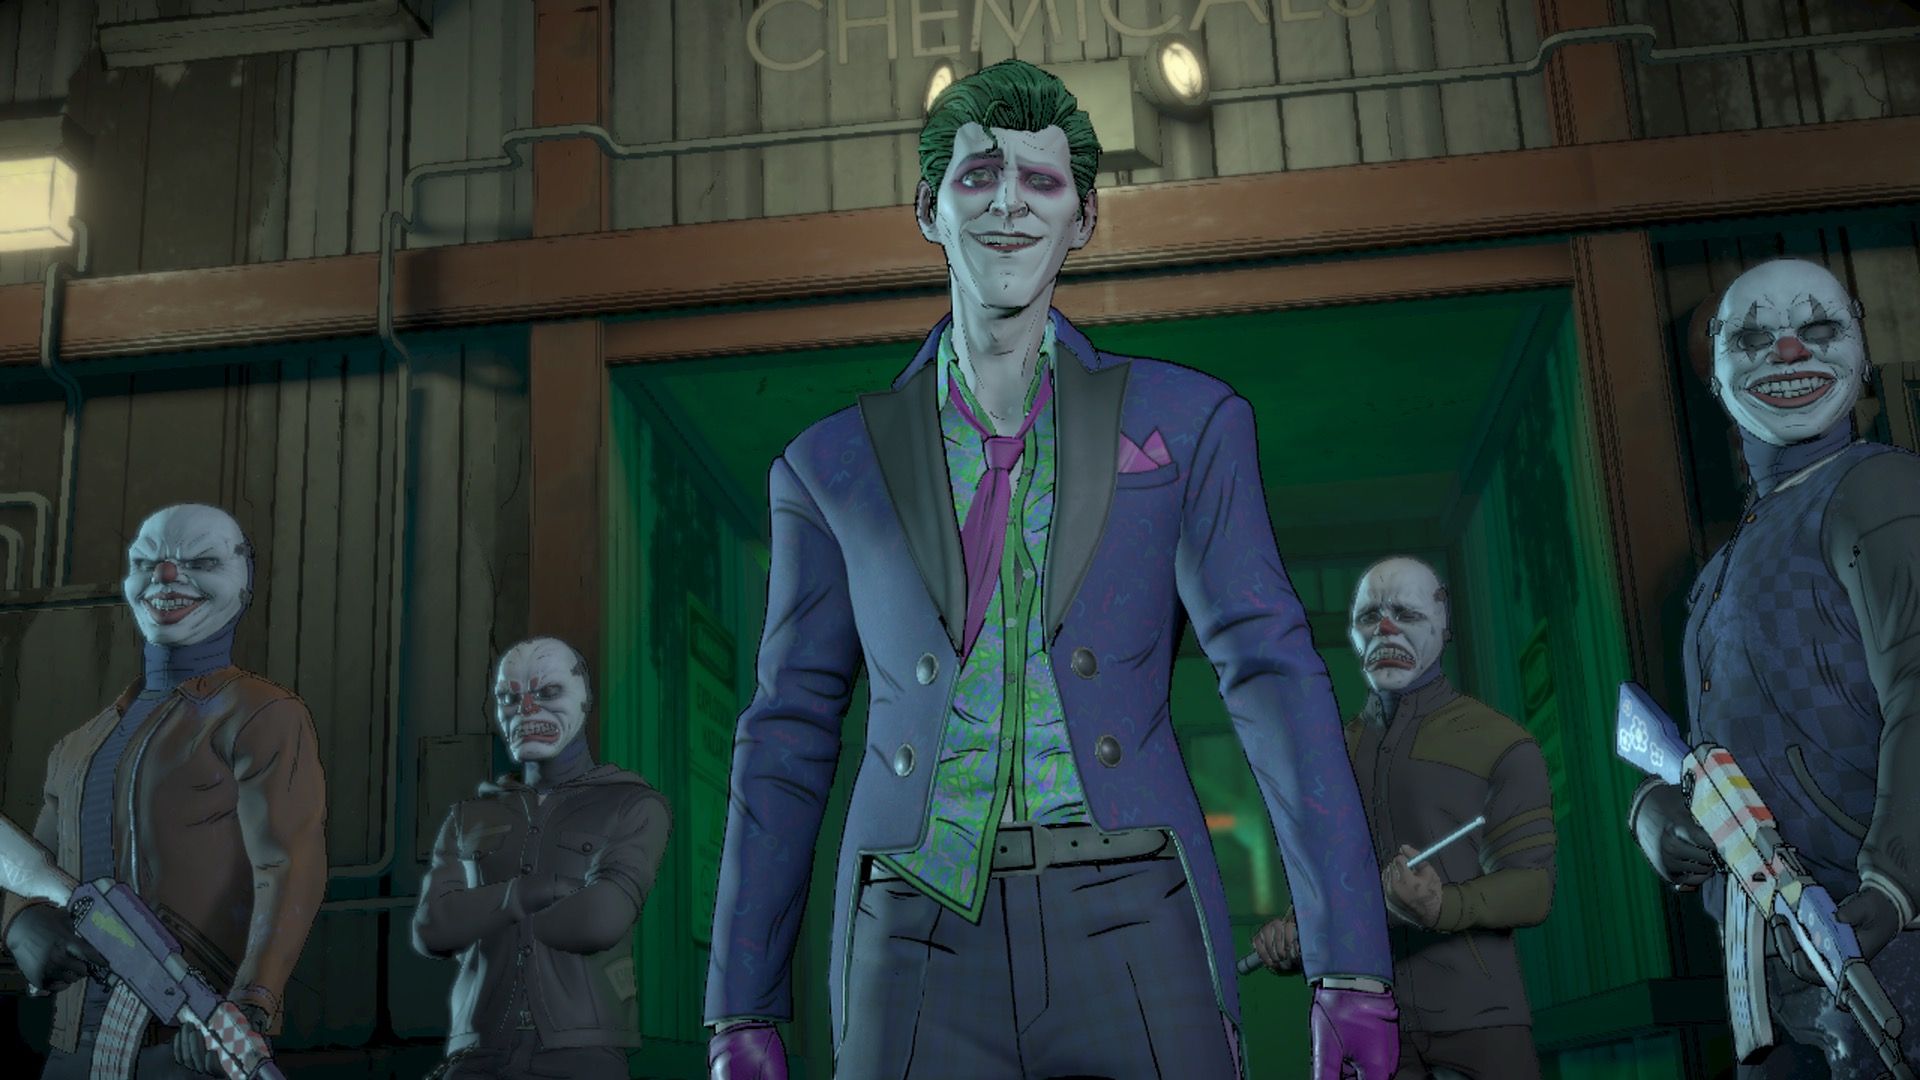 Batman: The Telltale Series what if scenarios for licensed properties underutilized, welcome